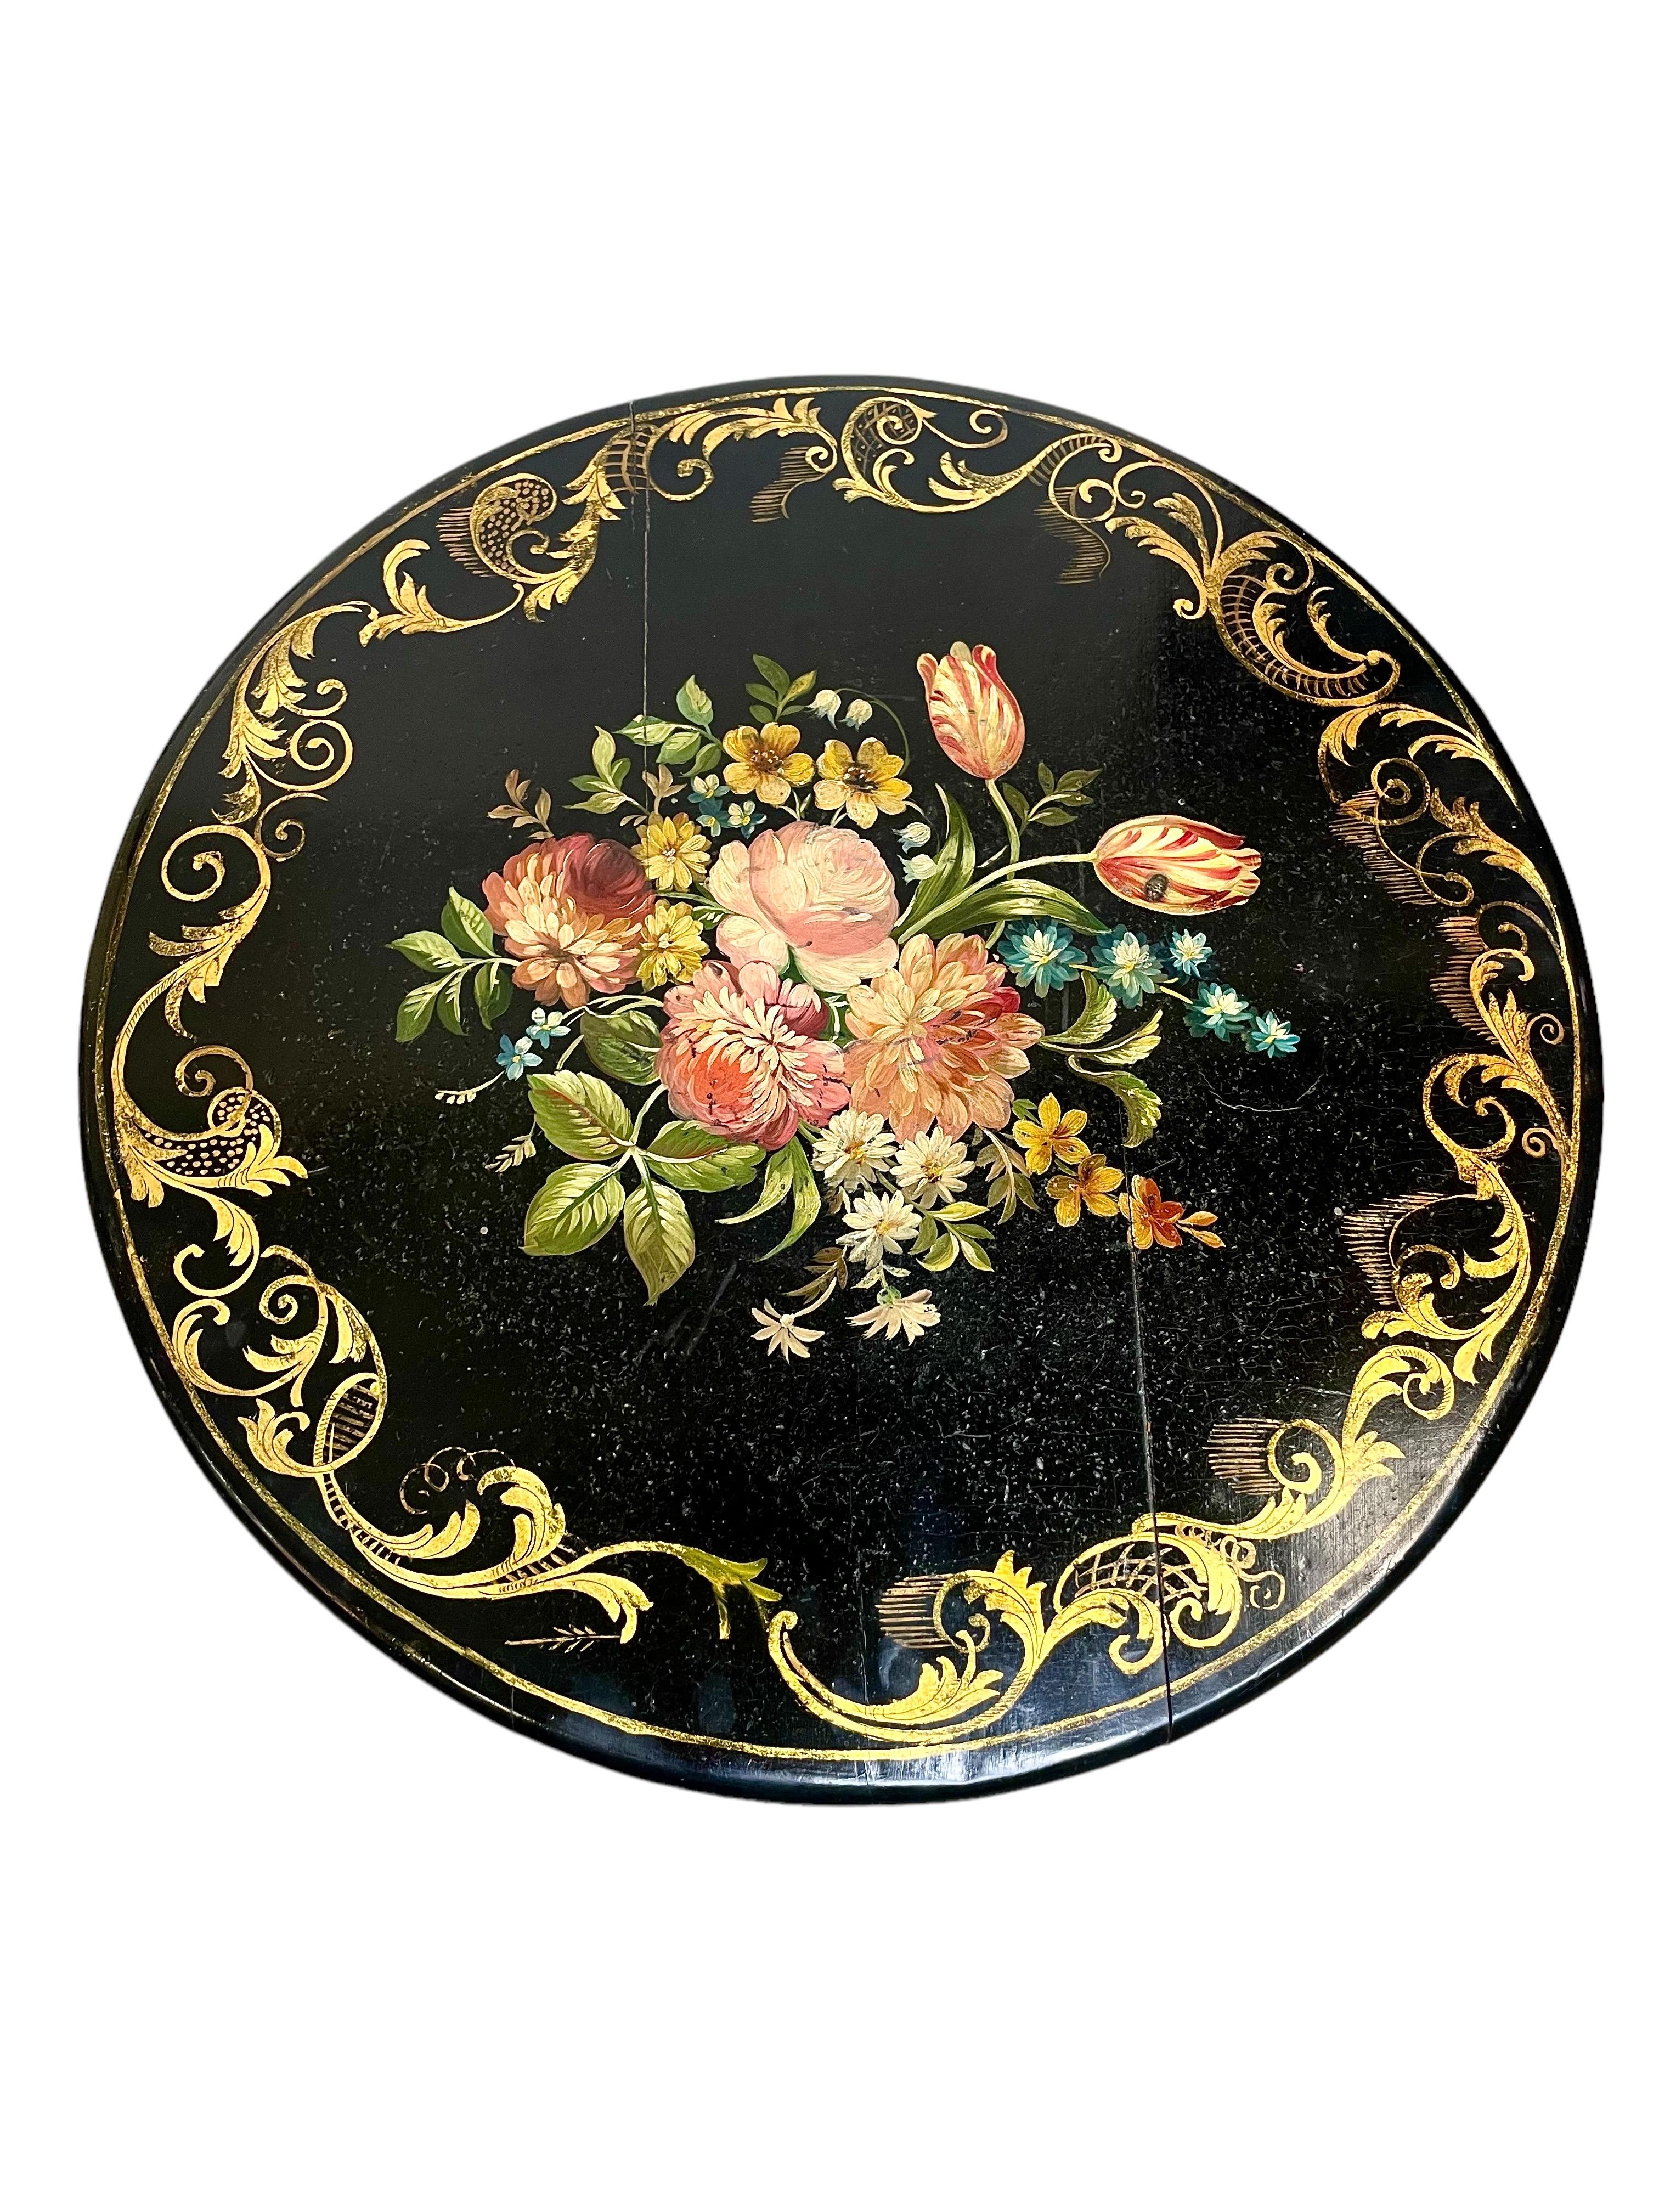 A stunning Napoleon III style ebonised guéridon table, with a lacquered circular top, and featuring a swirling parcel gilt decoration around the perimeter and a hand-painted polychrome design of wild flowers and foliage at the centre. The table is